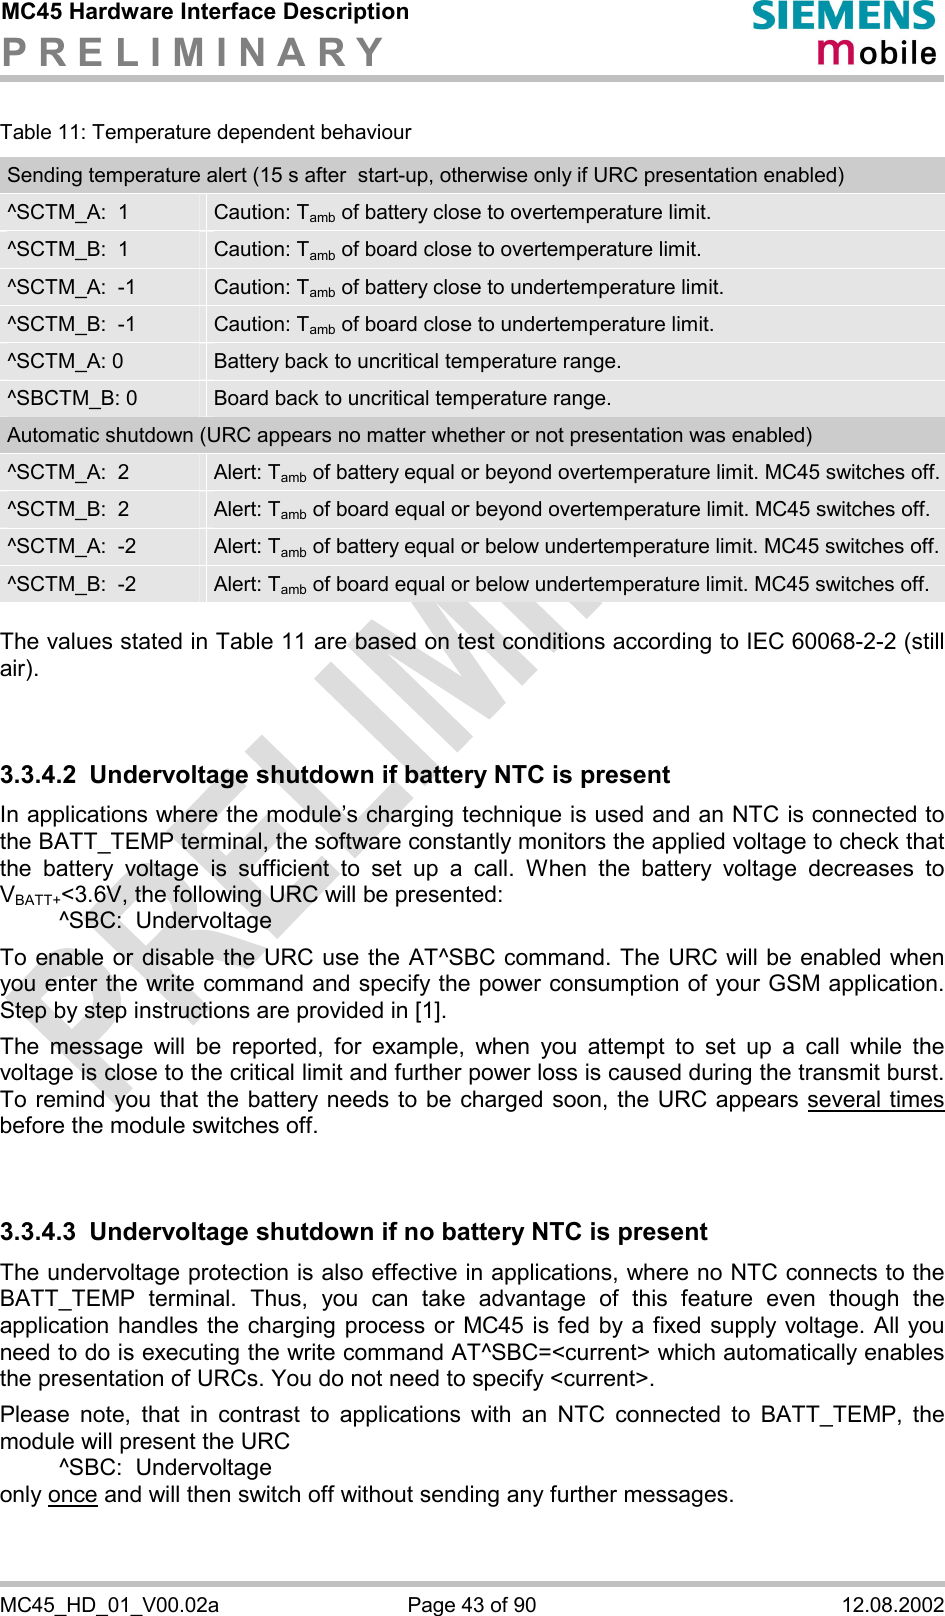 MC45 Hardware Interface Description P R E L I M I N A R Y      MC45_HD_01_V00.02a  Page 43 of 90  12.08.2002 Table 11: Temperature dependent behaviour Sending temperature alert (15 s after  start-up, otherwise only if URC presentation enabled) ^SCTM_A:  1  Caution: Tamb of battery close to overtemperature limit. ^SCTM_B:  1  Caution: Tamb of board close to overtemperature limit. ^SCTM_A:  -1  Caution: Tamb of battery close to undertemperature limit. ^SCTM_B:  -1  Caution: Tamb of board close to undertemperature limit. ^SCTM_A: 0  Battery back to uncritical temperature range. ^SBCTM_B: 0  Board back to uncritical temperature range. Automatic shutdown (URC appears no matter whether or not presentation was enabled) ^SCTM_A:  2  Alert: Tamb of battery equal or beyond overtemperature limit. MC45 switches off.^SCTM_B:  2  Alert: Tamb of board equal or beyond overtemperature limit. MC45 switches off. ^SCTM_A:  -2  Alert: Tamb of battery equal or below undertemperature limit. MC45 switches off. ^SCTM_B:  -2  Alert: Tamb of board equal or below undertemperature limit. MC45 switches off.  The values stated in Table 11 are based on test conditions according to IEC 60068-2-2 (still air).   3.3.4.2  Undervoltage shutdown if battery NTC is present In applications where the module’s charging technique is used and an NTC is connected to the BATT_TEMP terminal, the software constantly monitors the applied voltage to check that the battery voltage is sufficient to set up a call. When the battery voltage decreases to VBATT+&lt;3.6V, the following URC will be presented:    ^SBC:  Undervoltage  To enable or disable the URC use the AT^SBC command. The URC will be enabled when you enter the write command and specify the power consumption of your GSM application. Step by step instructions are provided in [1].  The message will be reported, for example, when you attempt to set up a call while the voltage is close to the critical limit and further power loss is caused during the transmit burst. To remind you that the battery needs to be charged soon, the URC appears several times before the module switches off.    3.3.4.3  Undervoltage shutdown if no battery NTC is present The undervoltage protection is also effective in applications, where no NTC connects to the BATT_TEMP terminal. Thus, you can take advantage of this feature even though the application handles the charging process or MC45 is fed by a fixed supply voltage. All you need to do is executing the write command AT^SBC=&lt;current&gt; which automatically enables the presentation of URCs. You do not need to specify &lt;current&gt;.   Please note, that in contrast to applications with an NTC connected to BATT_TEMP, the module will present the URC    ^SBC:  Undervoltage only once and will then switch off without sending any further messages.  